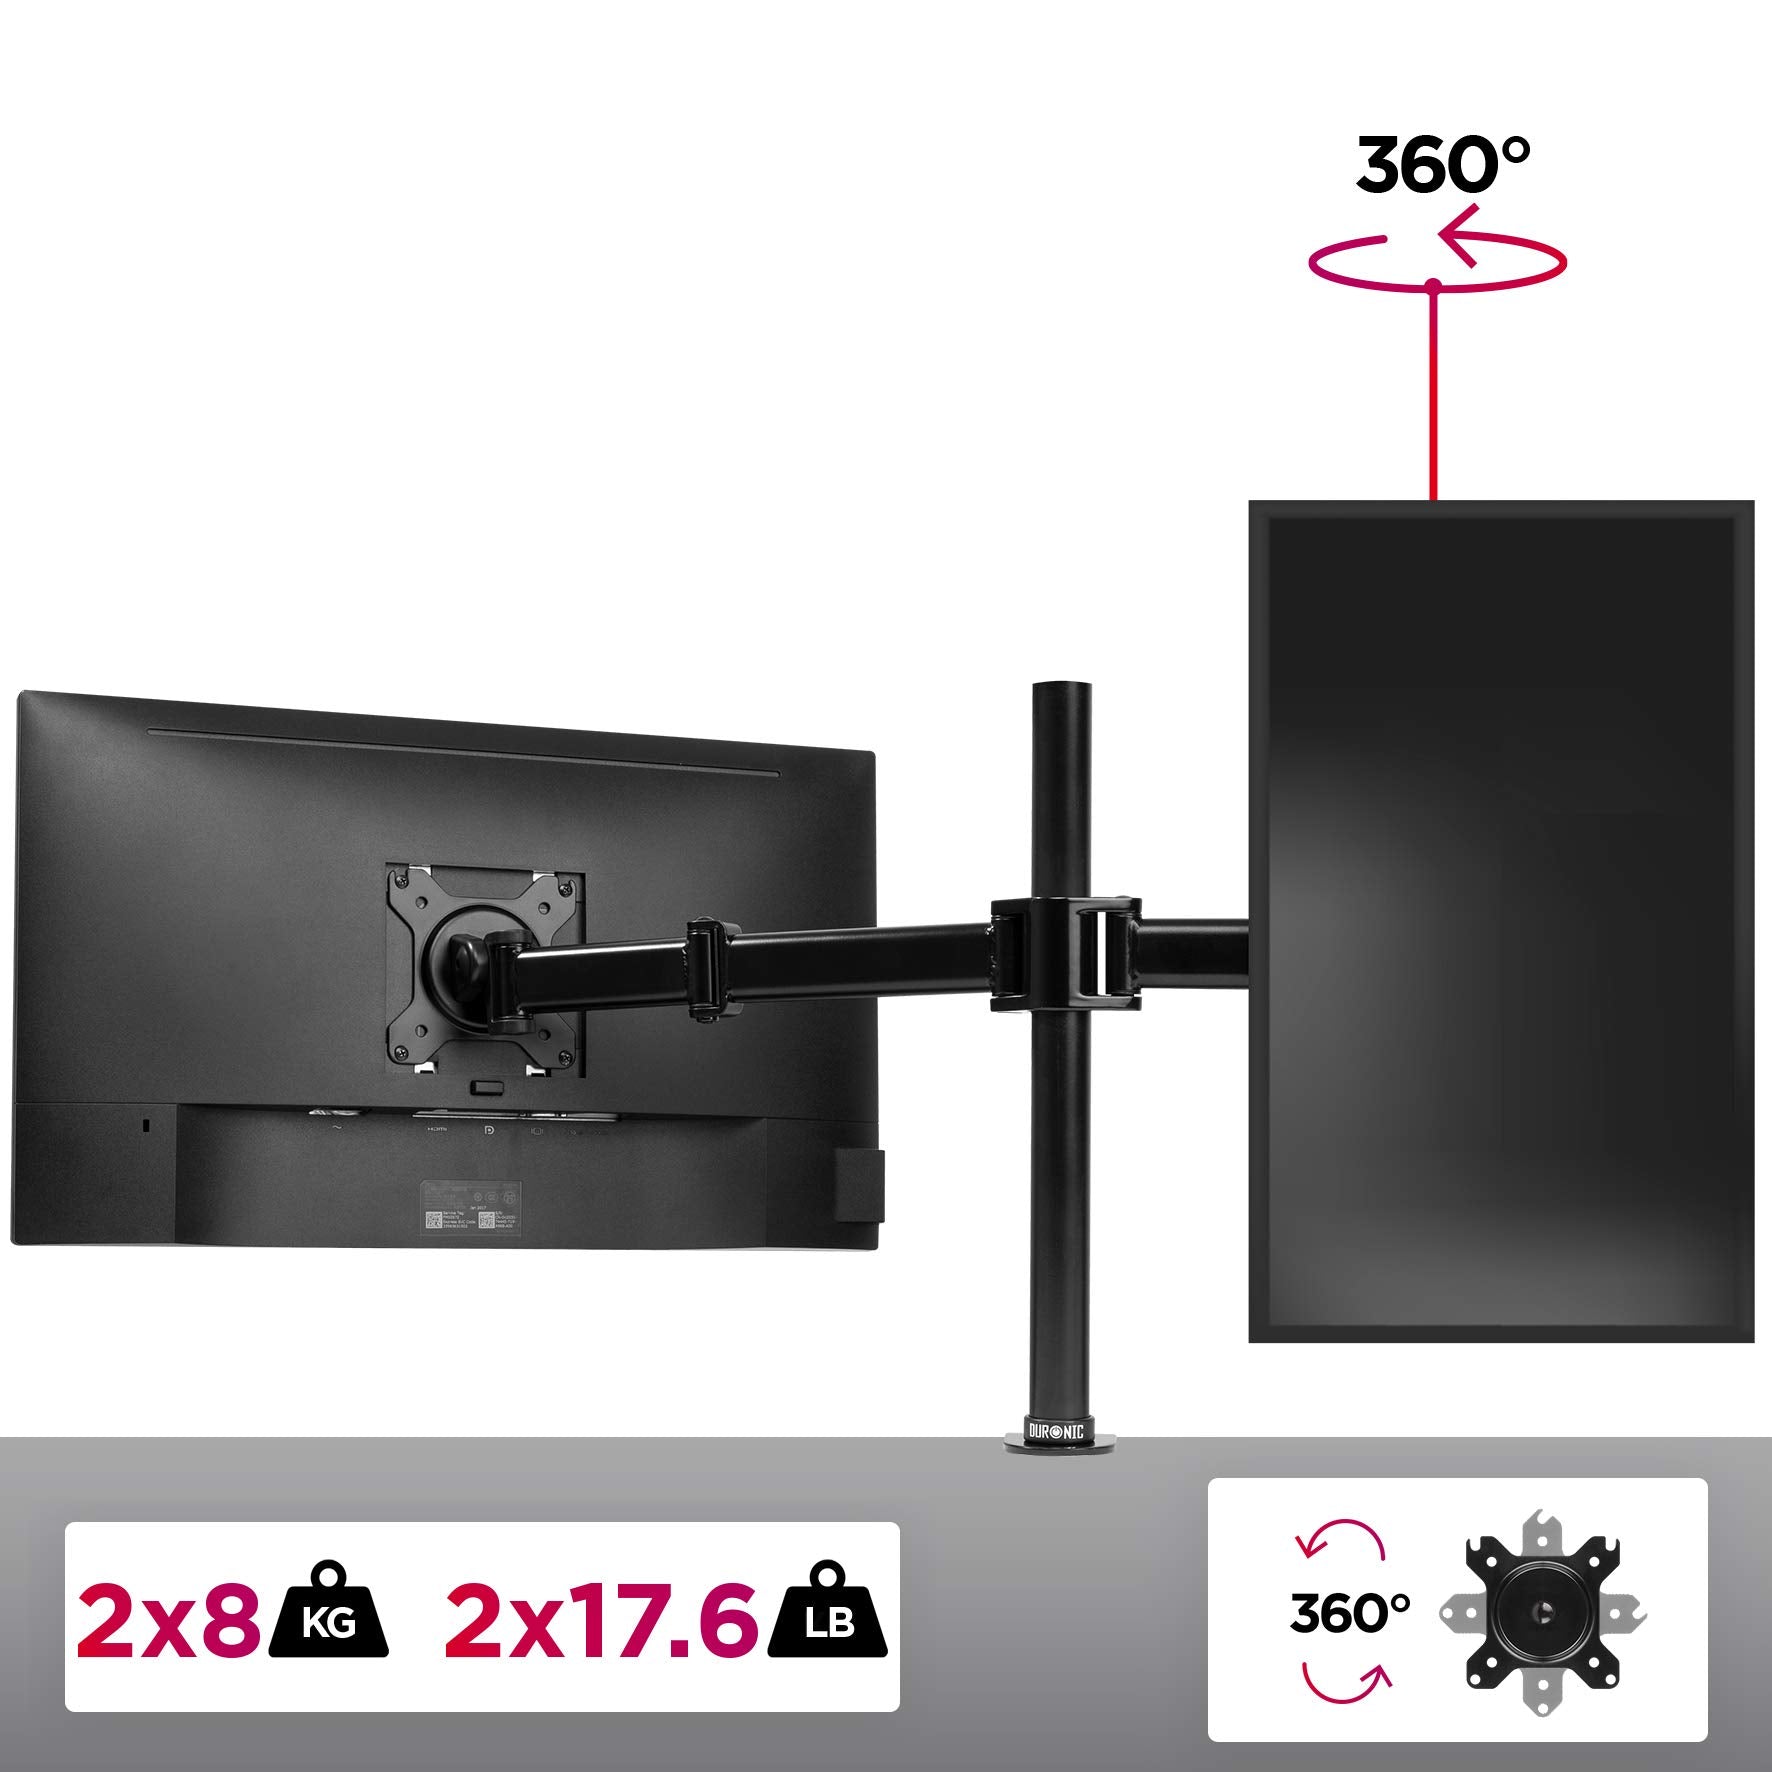 Duronic Dual Monitor Arm Stand DM252 | Double PC Desk Mount | Steel | Height Adjustable | For Two 13-27 Inch LED LCD Screens | VESA 75/100 | 8kg Per Screen | Tilt -90°/+35°, Swivel 180°, Rotate 360°